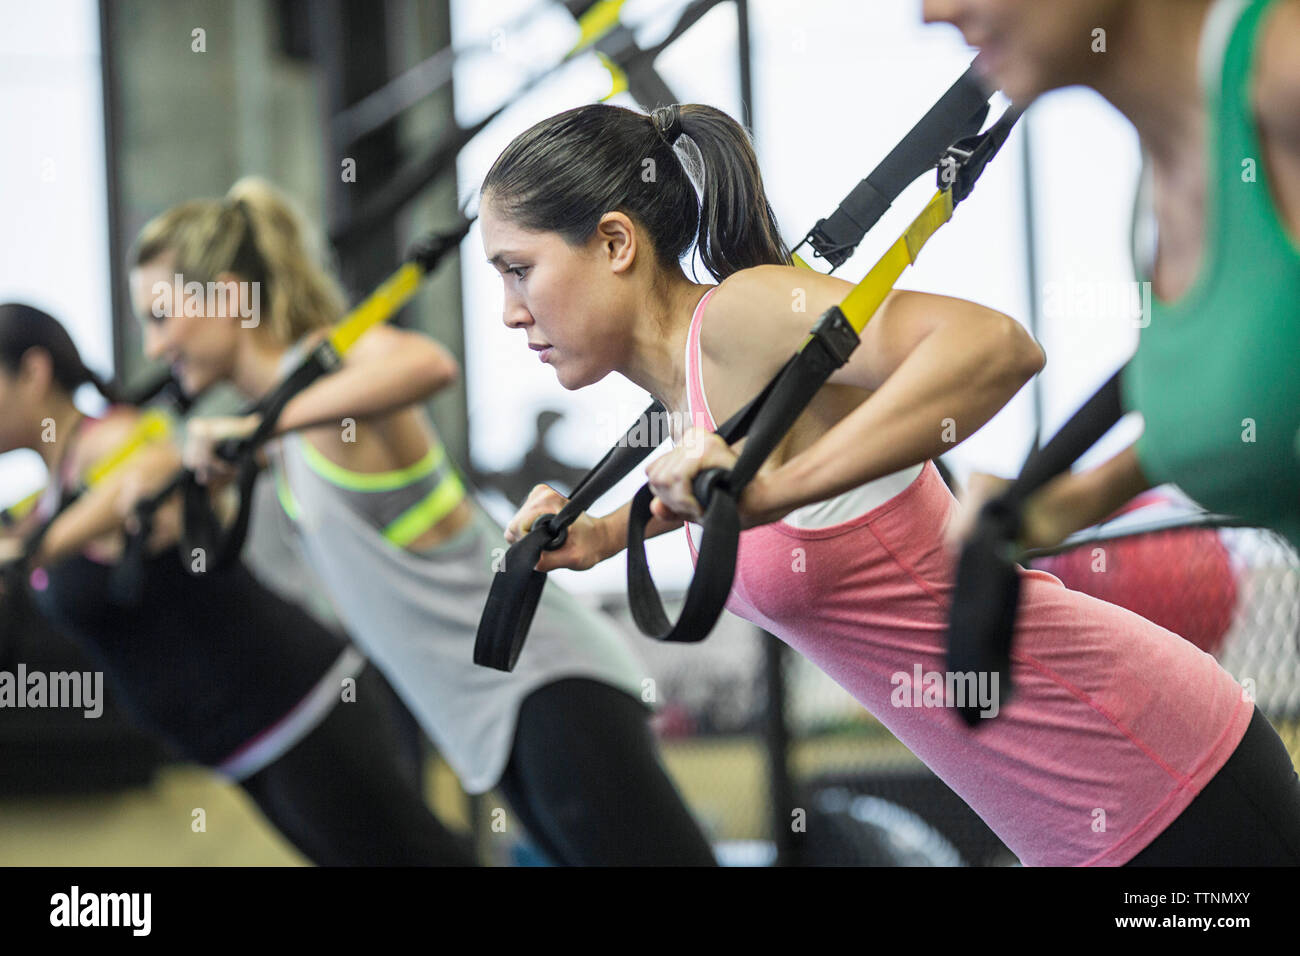 Women pulling resistance bands in gym Stock Photo